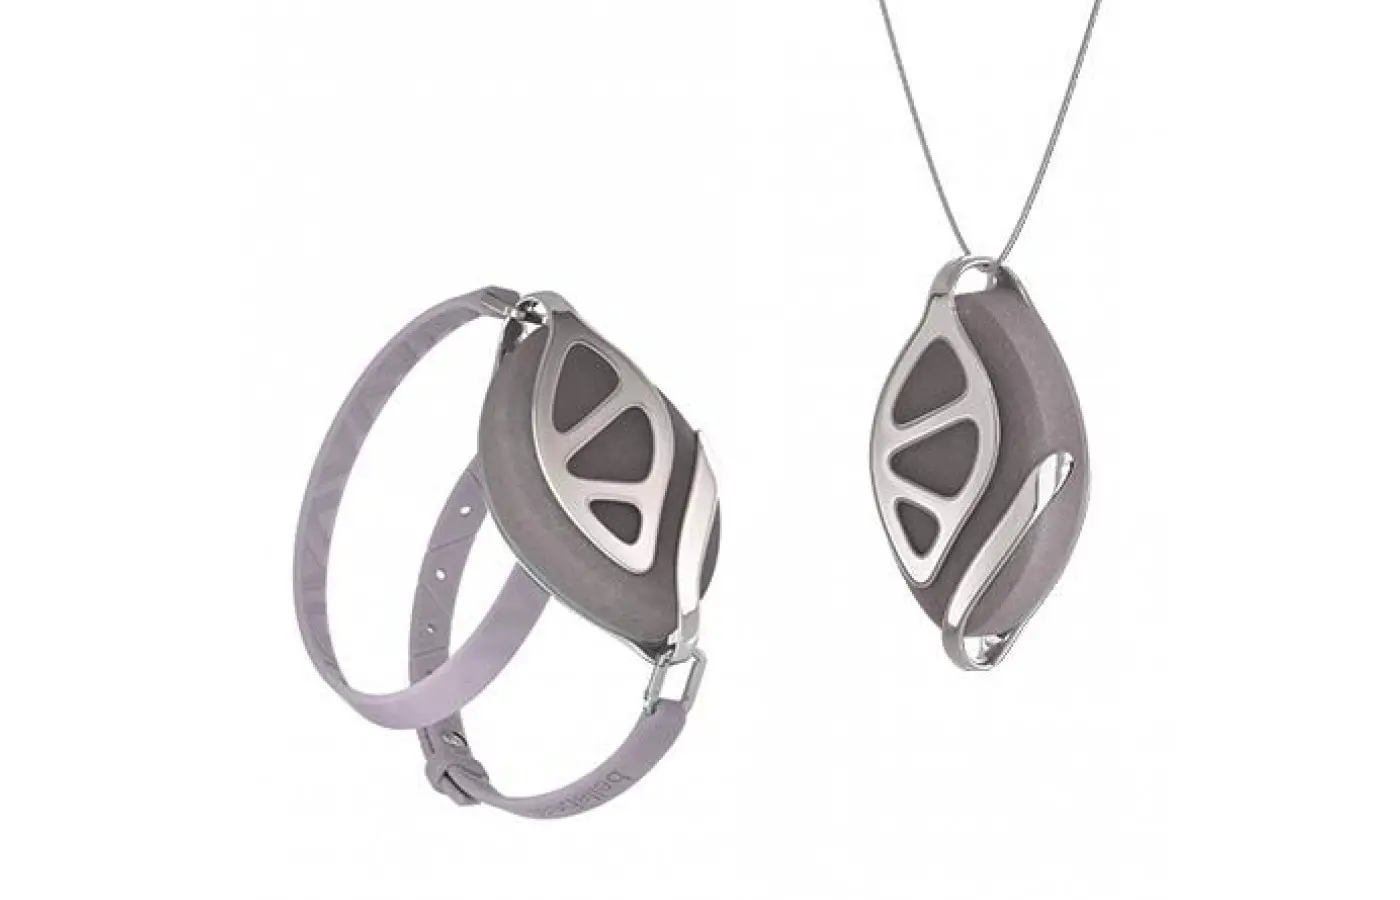 The Bellabeat Leaf combines both physical activity and fashion into one.